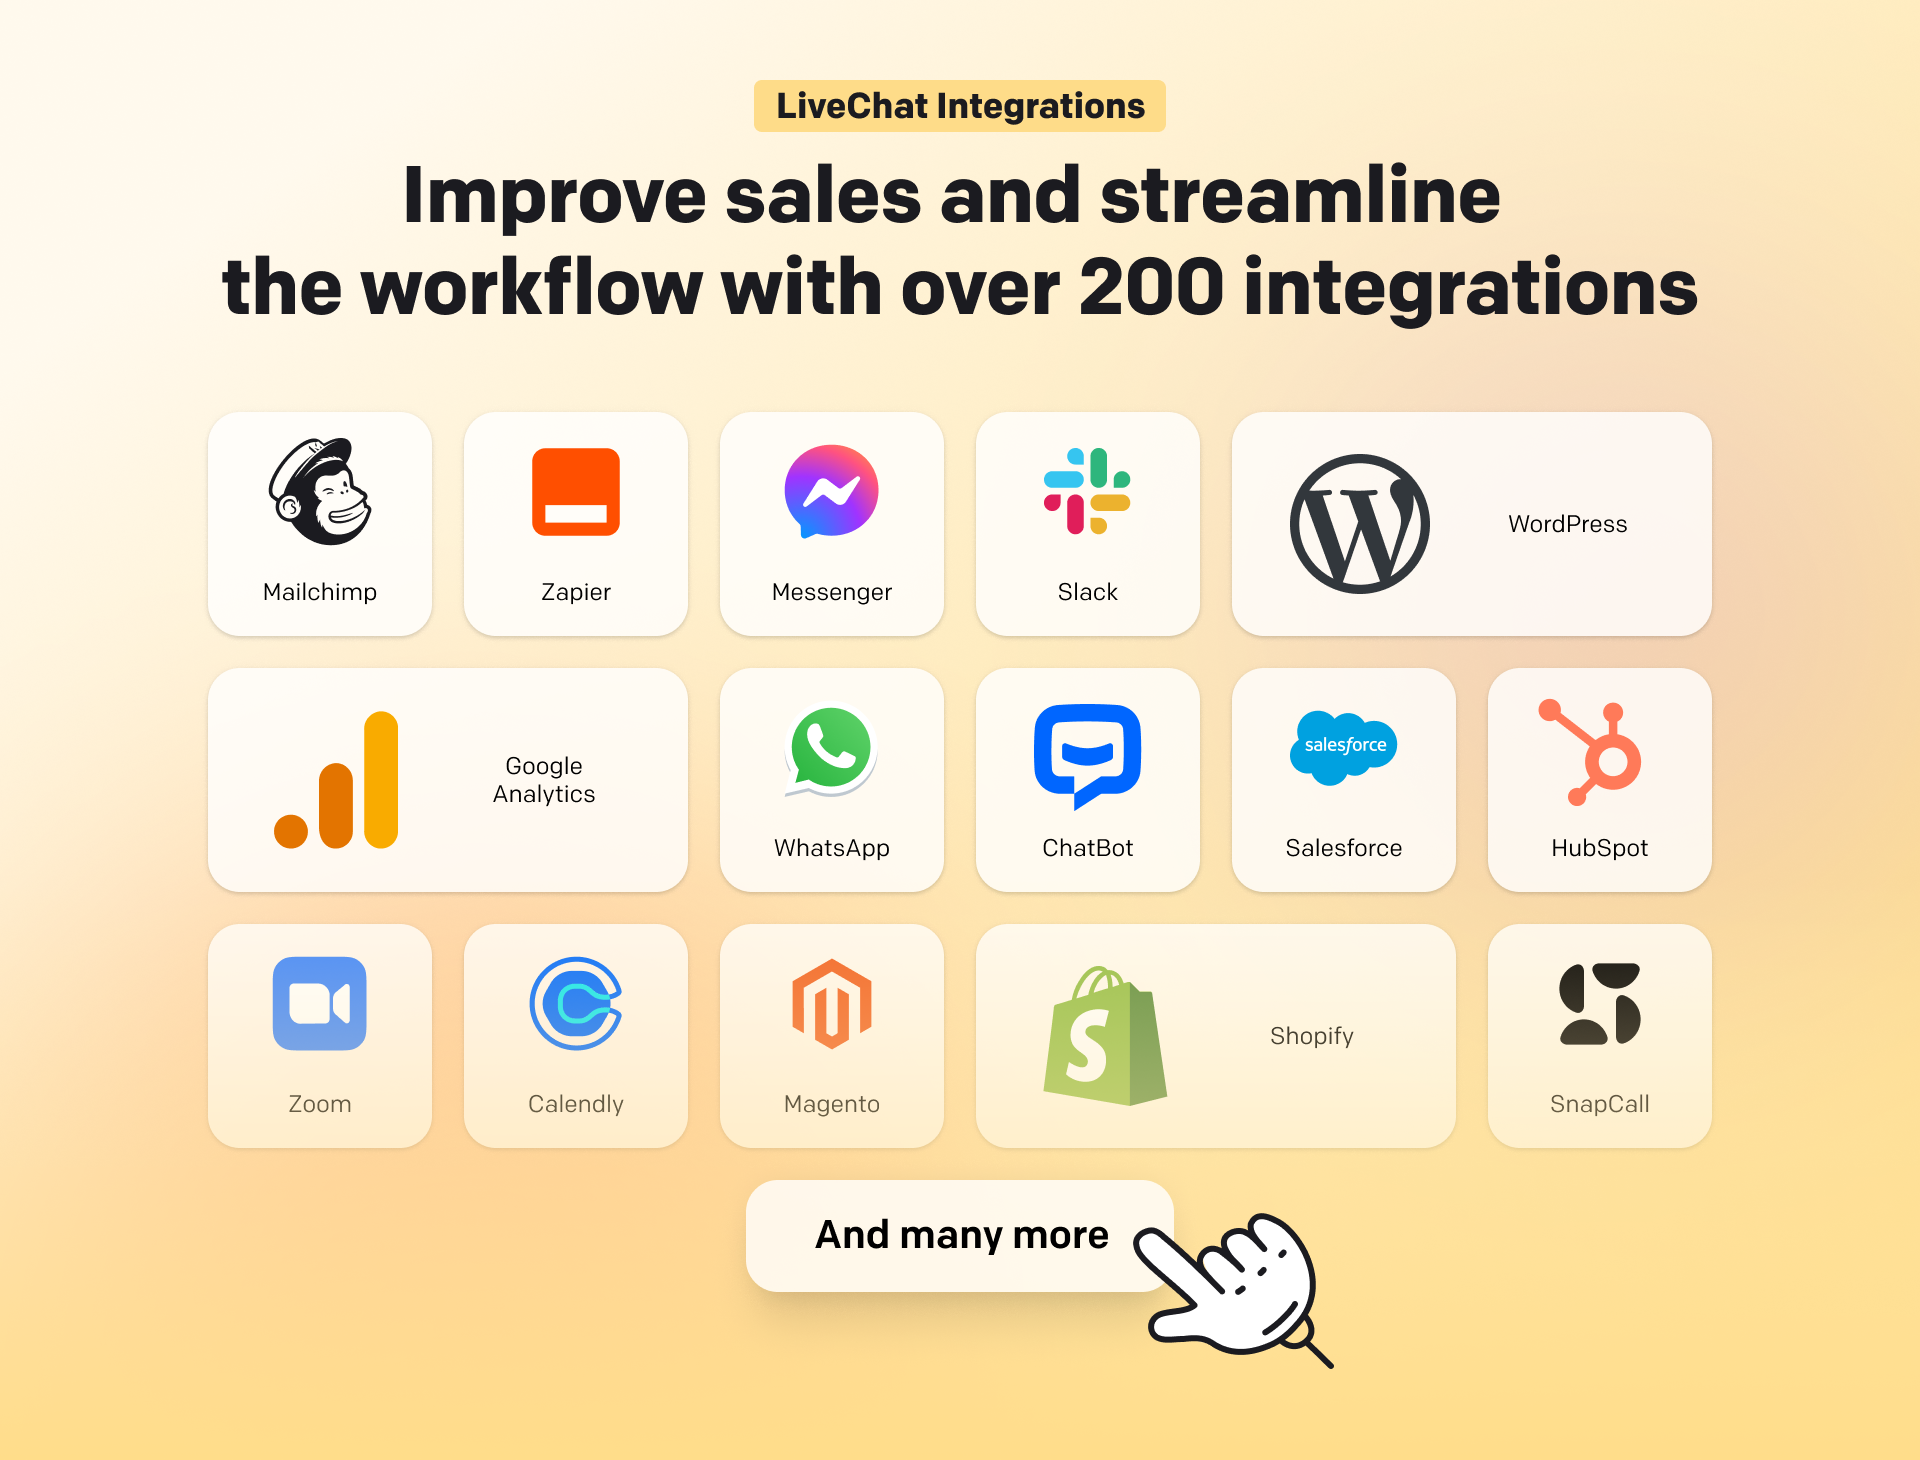 LiveChat Software - Over 200 integrations